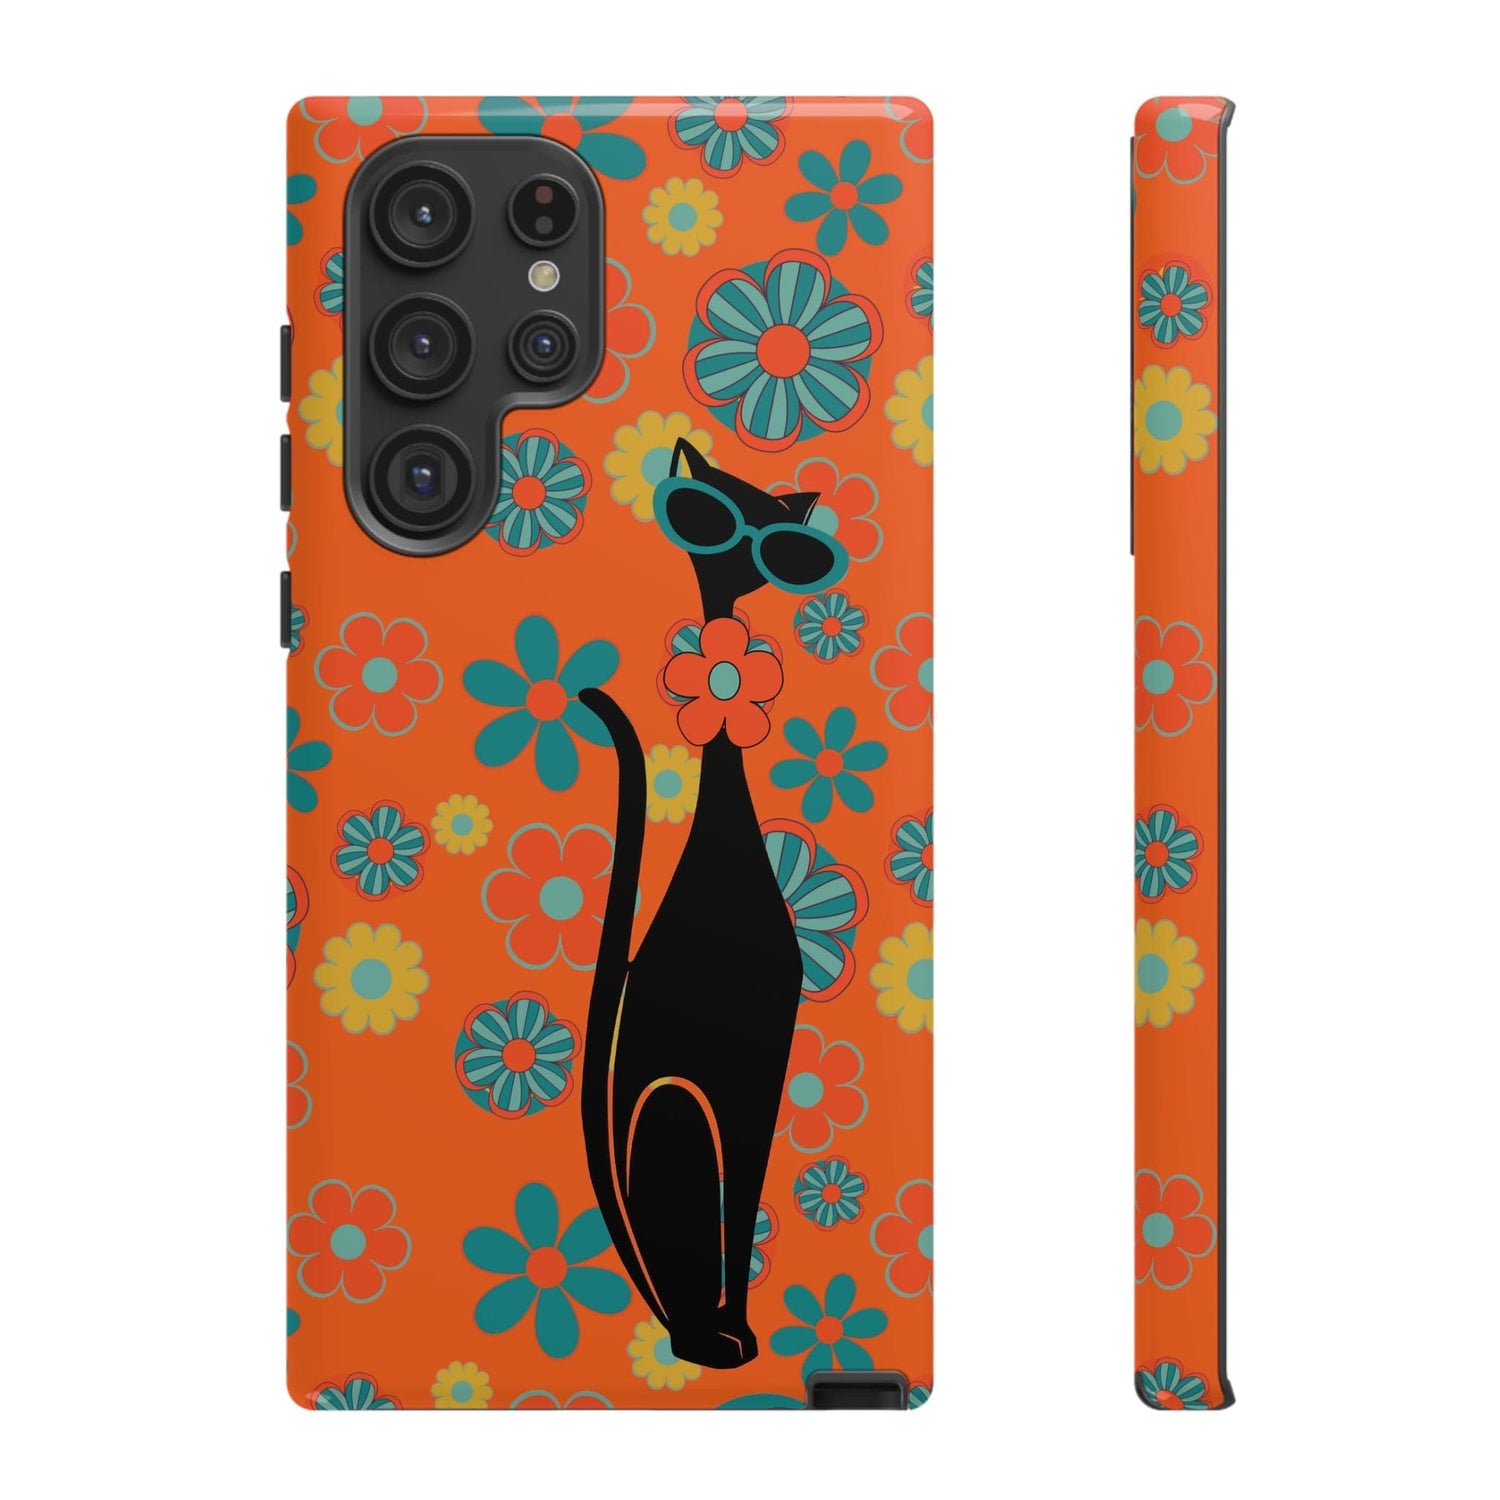 Flower Power, Retro Groovy Atomic Cat, Hipster Style Orange Samsung Galaxy and Google Pixel Tough Cases Phone Case Samsung Galaxy S22 Ultra / Glossy